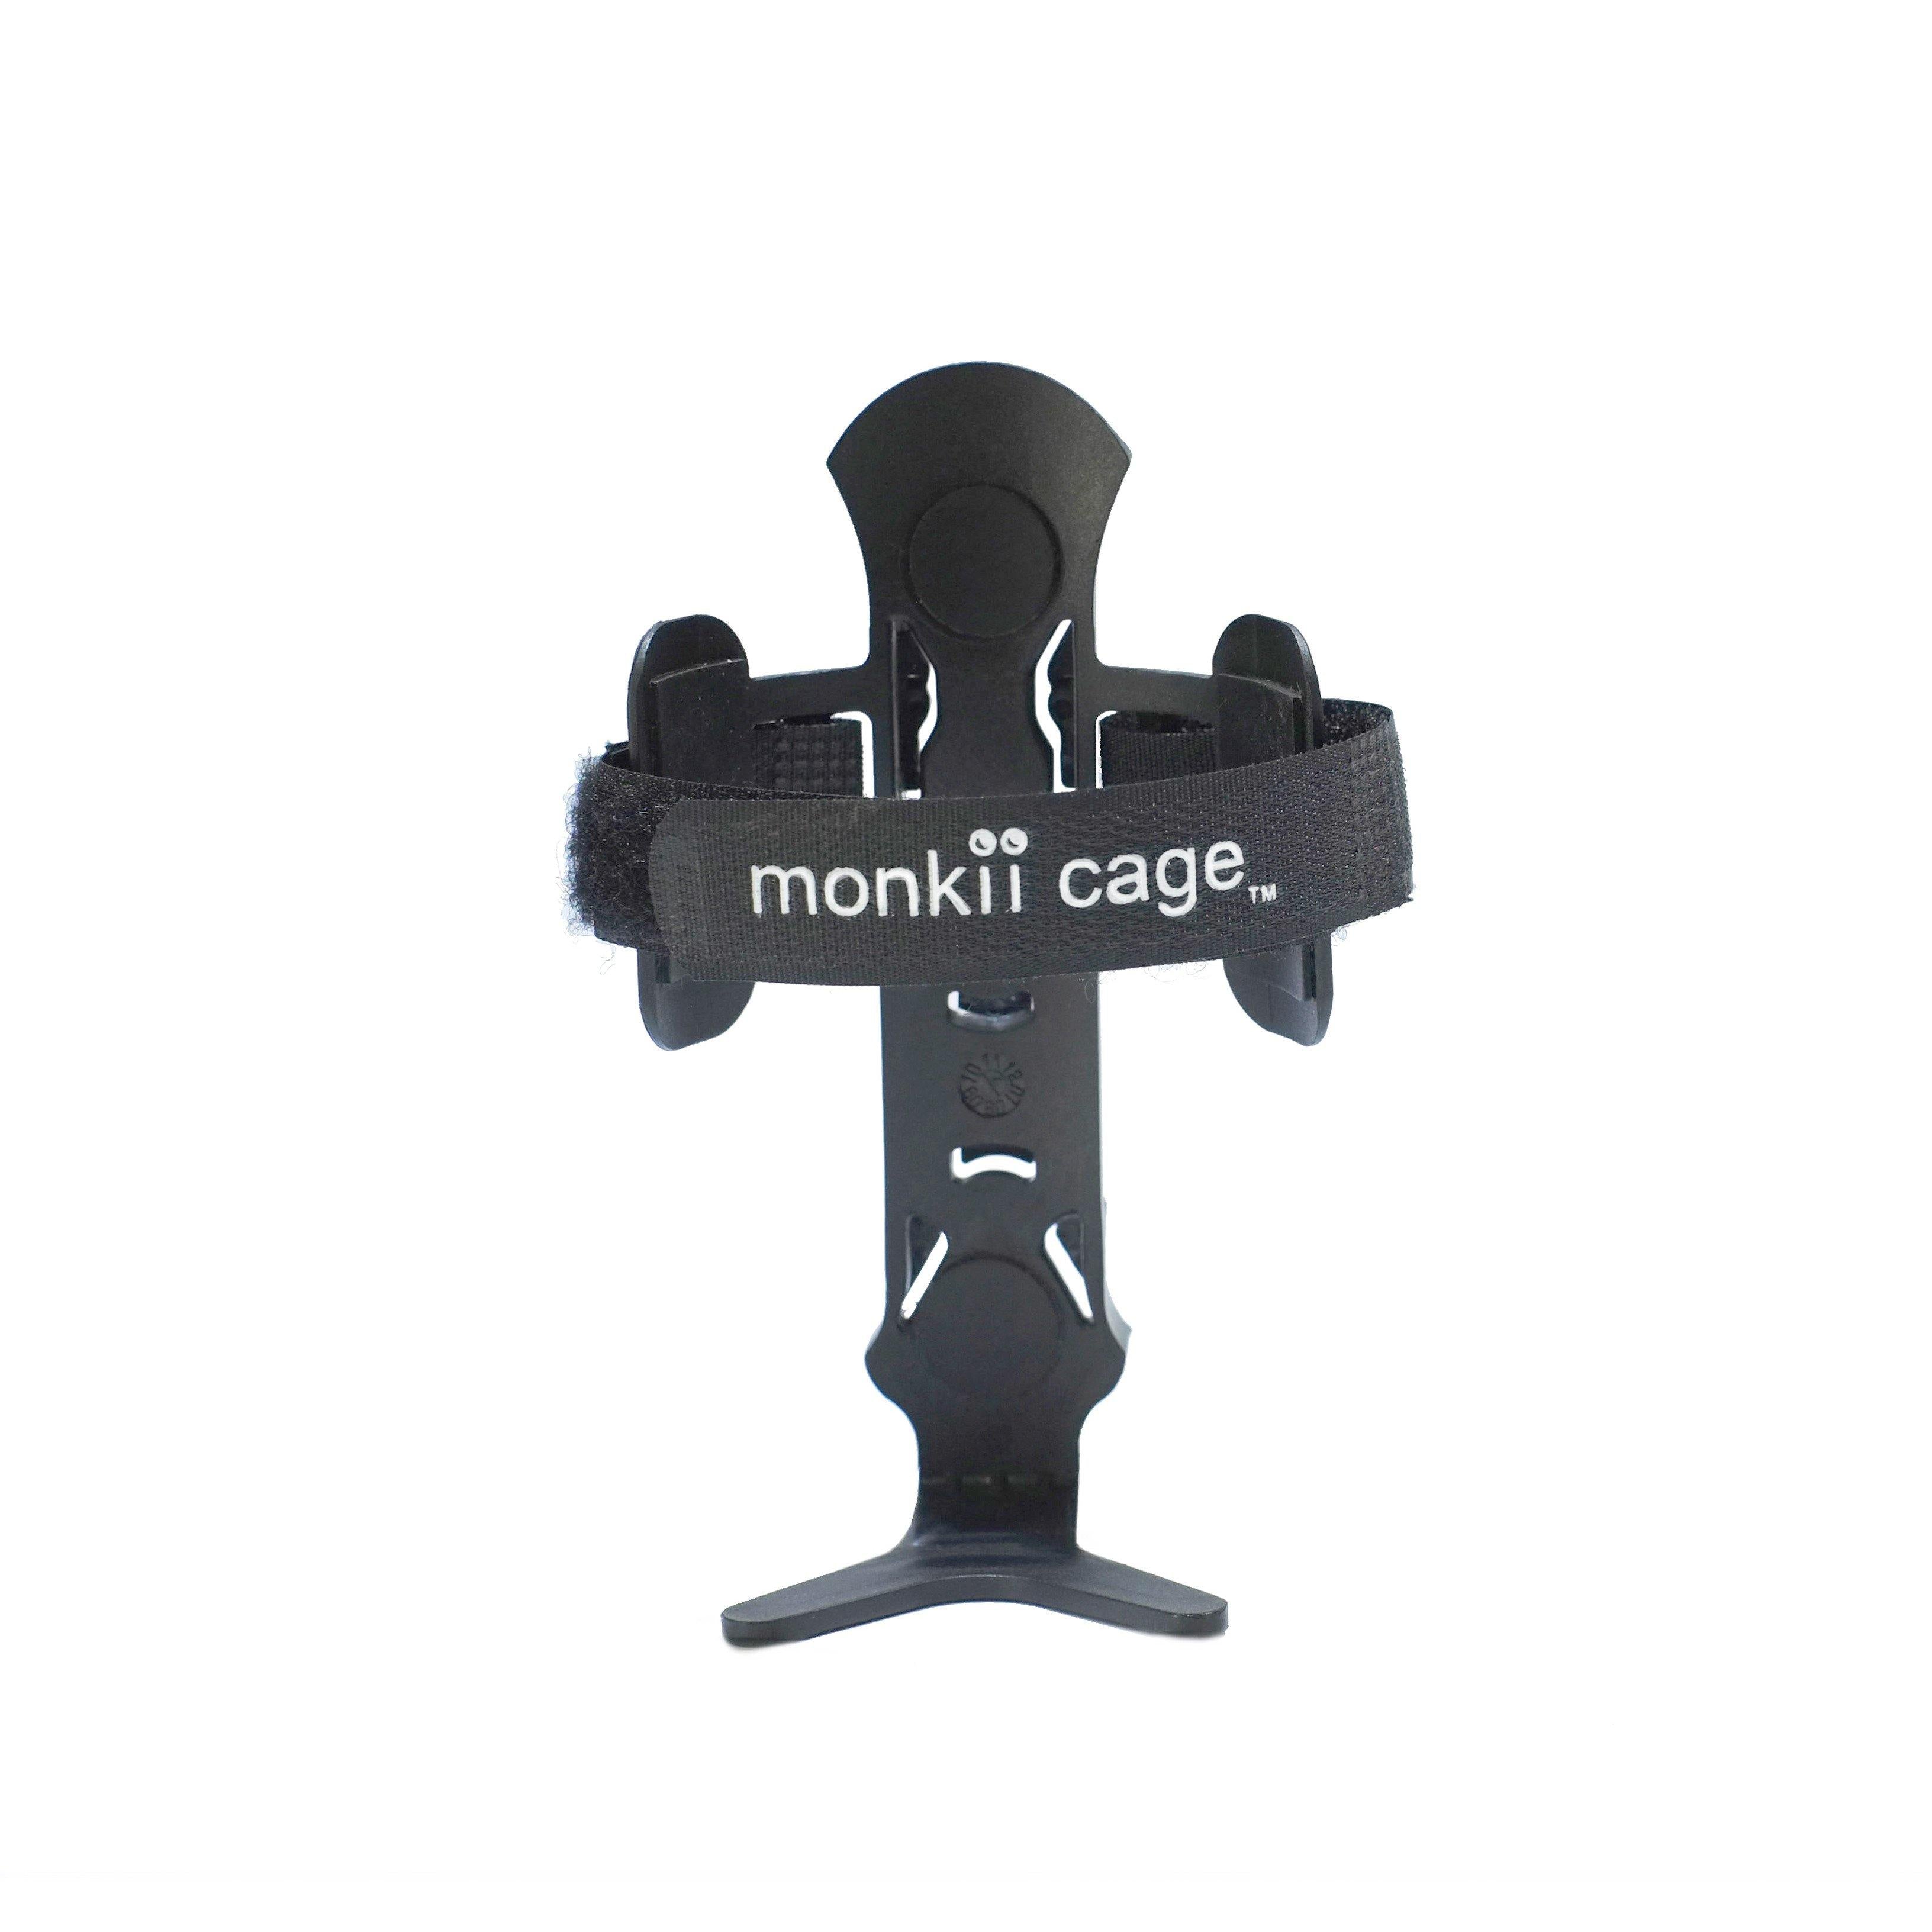 monkii cage